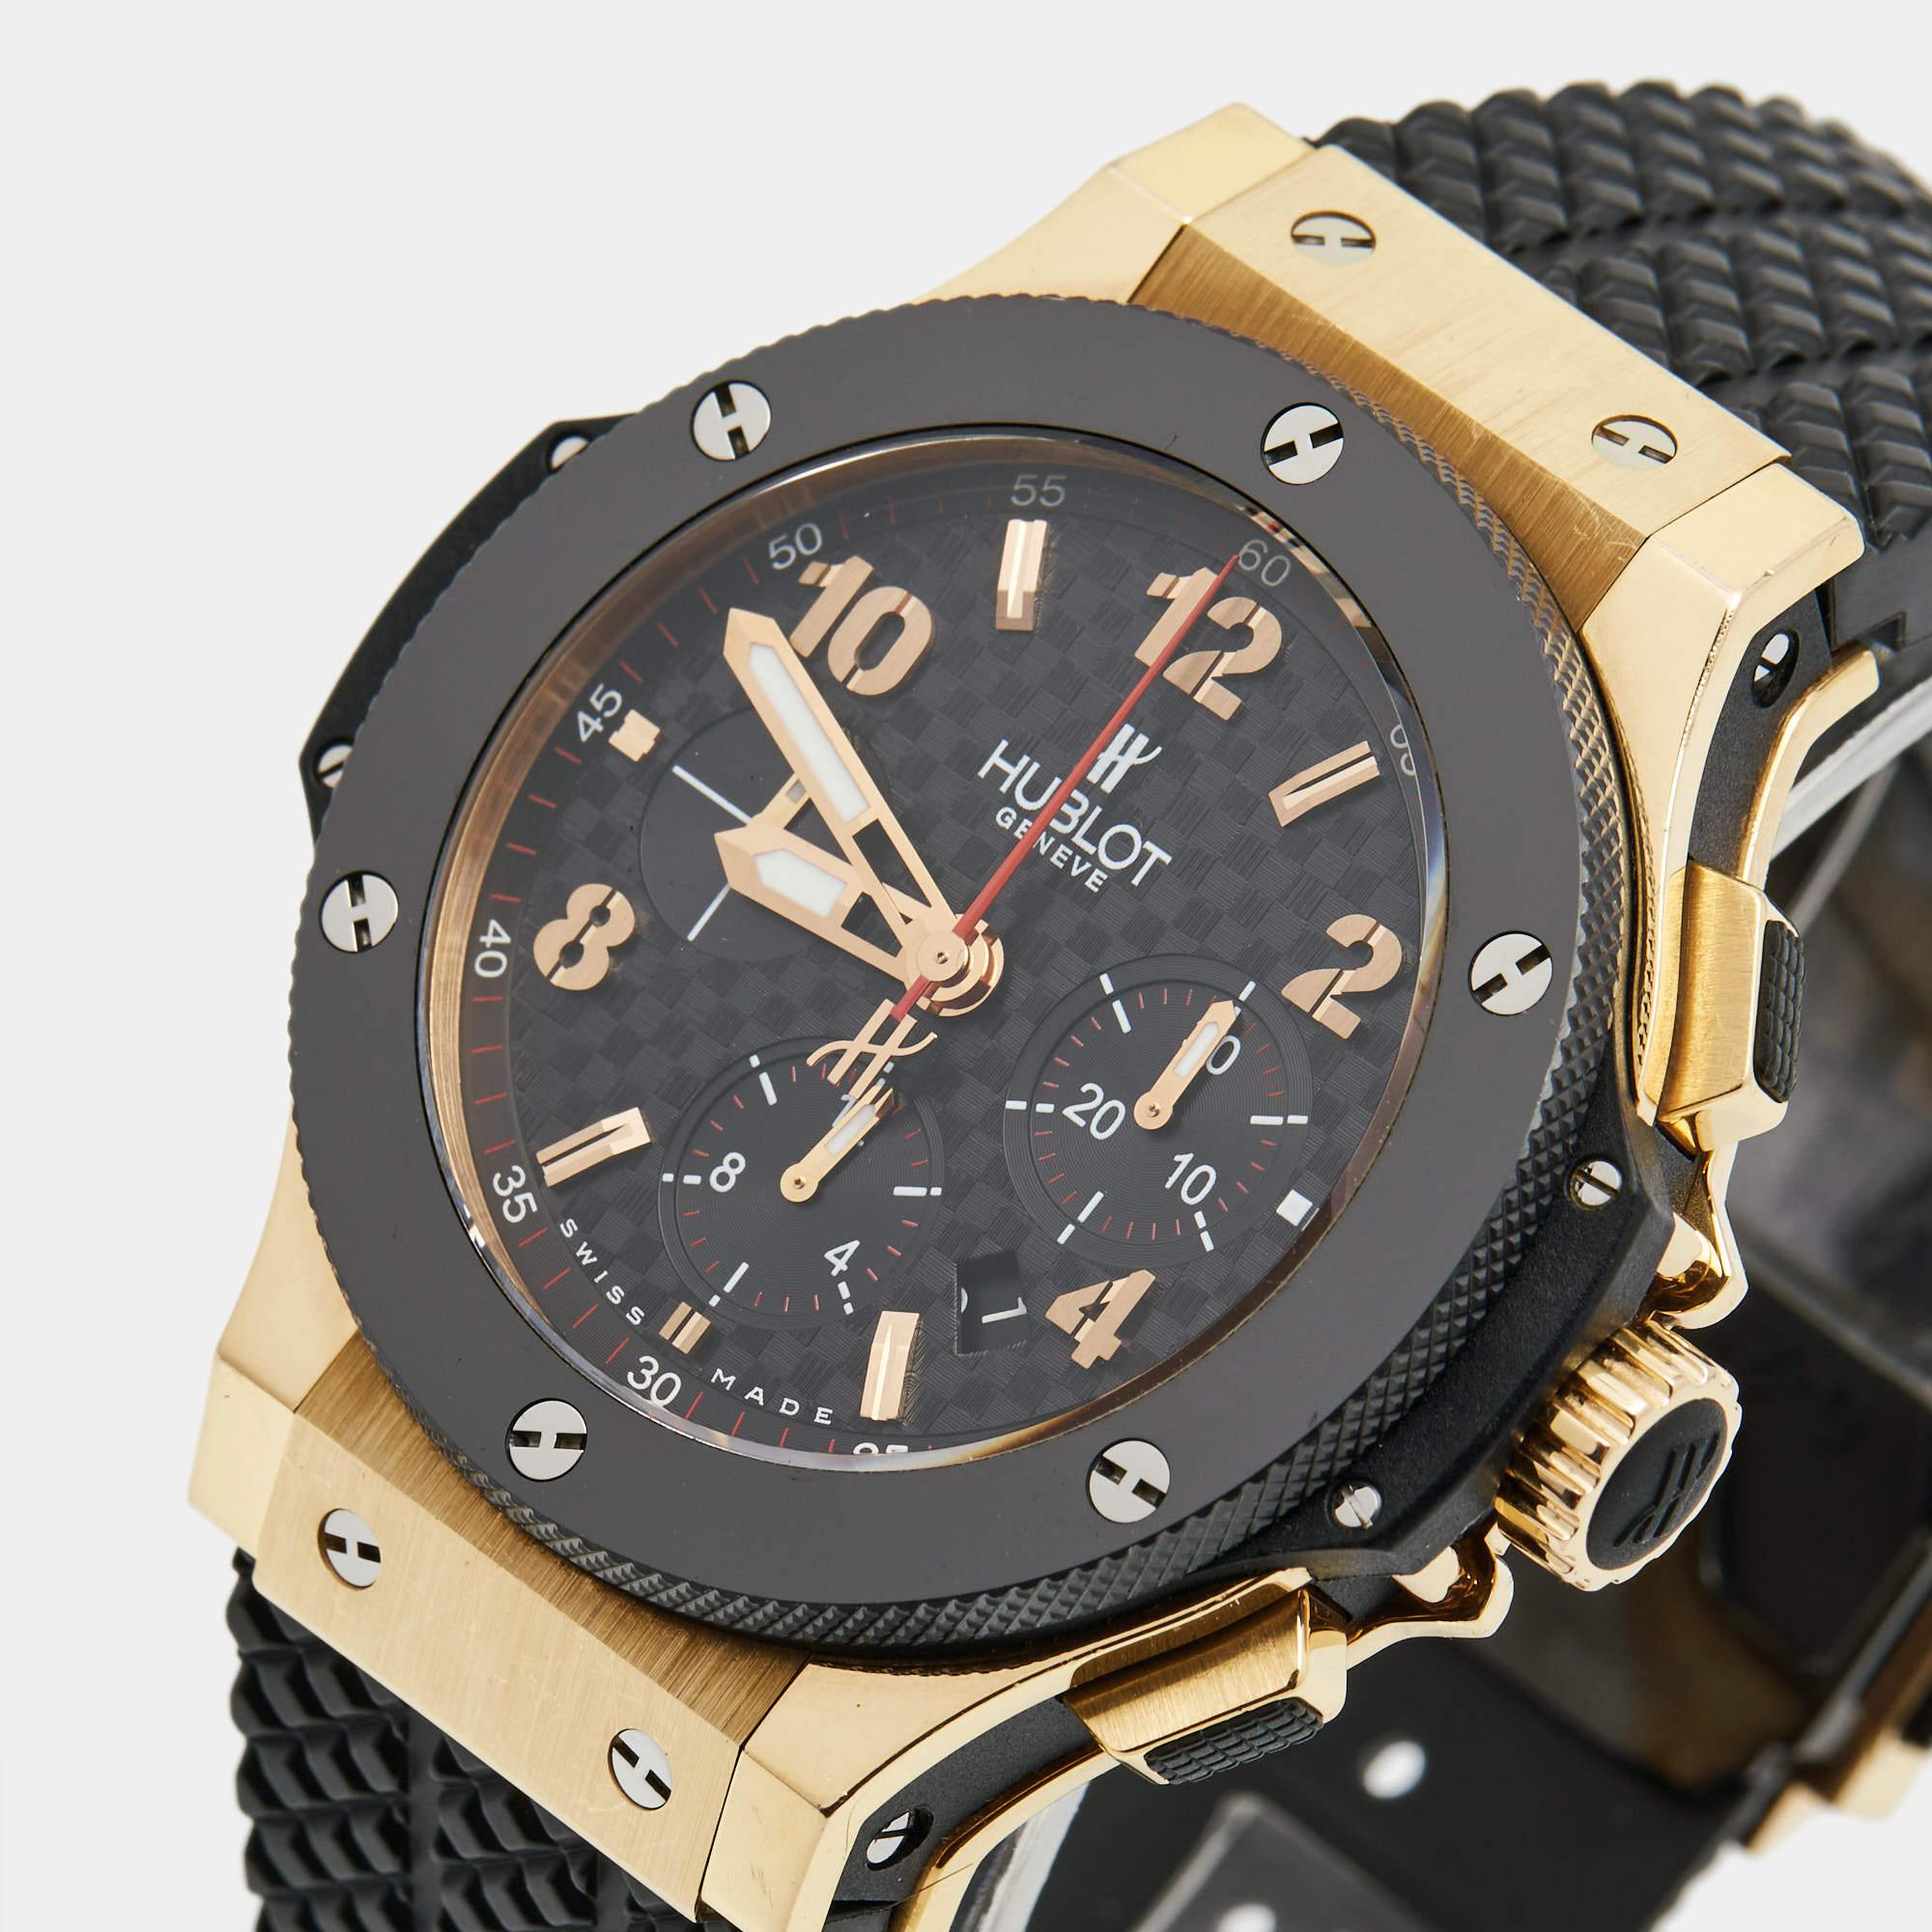 Embrace the legacy of timekeeping perfection with an authentic Hublot timepiece. Meticulously crafted, it radiates elegance and status, boasting exceptional precision, enduring style, and the iconic Hublot legacy.

Includes
Original Box, Original